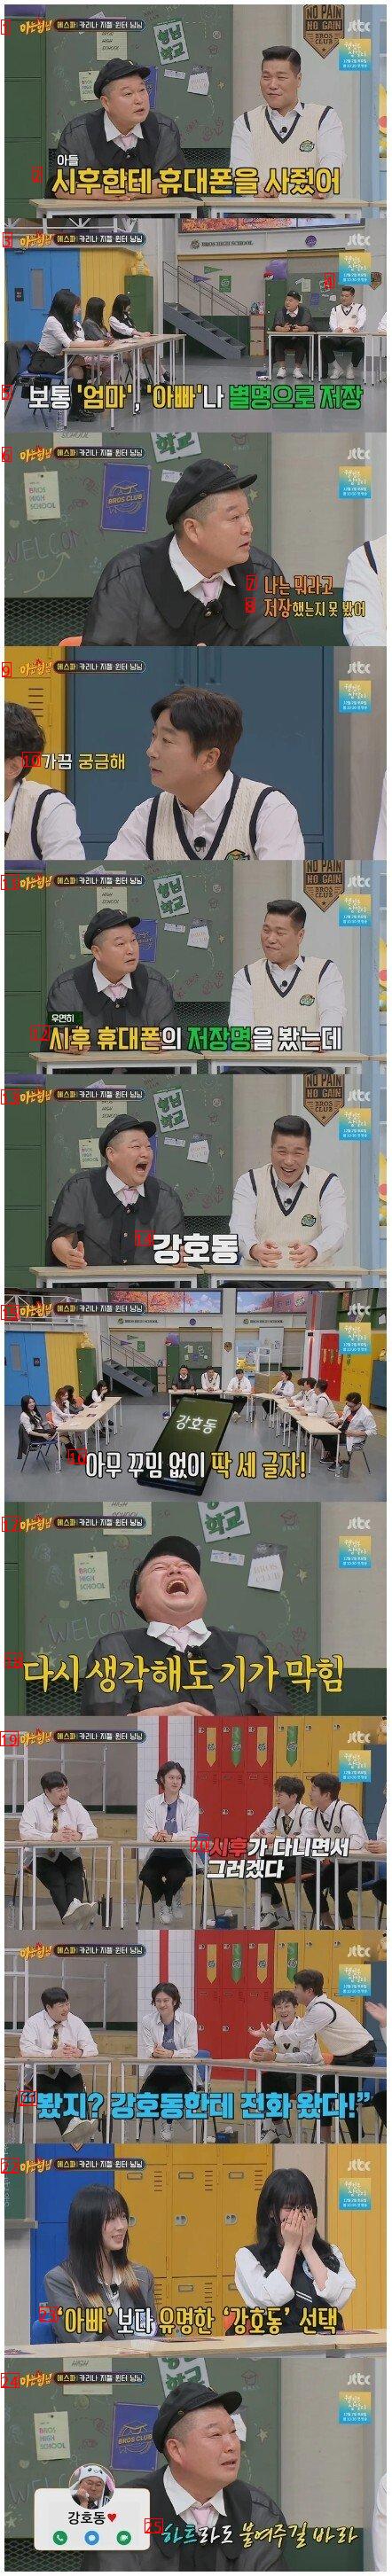 Kang Ho-dong was surprised when he saw his son's phone